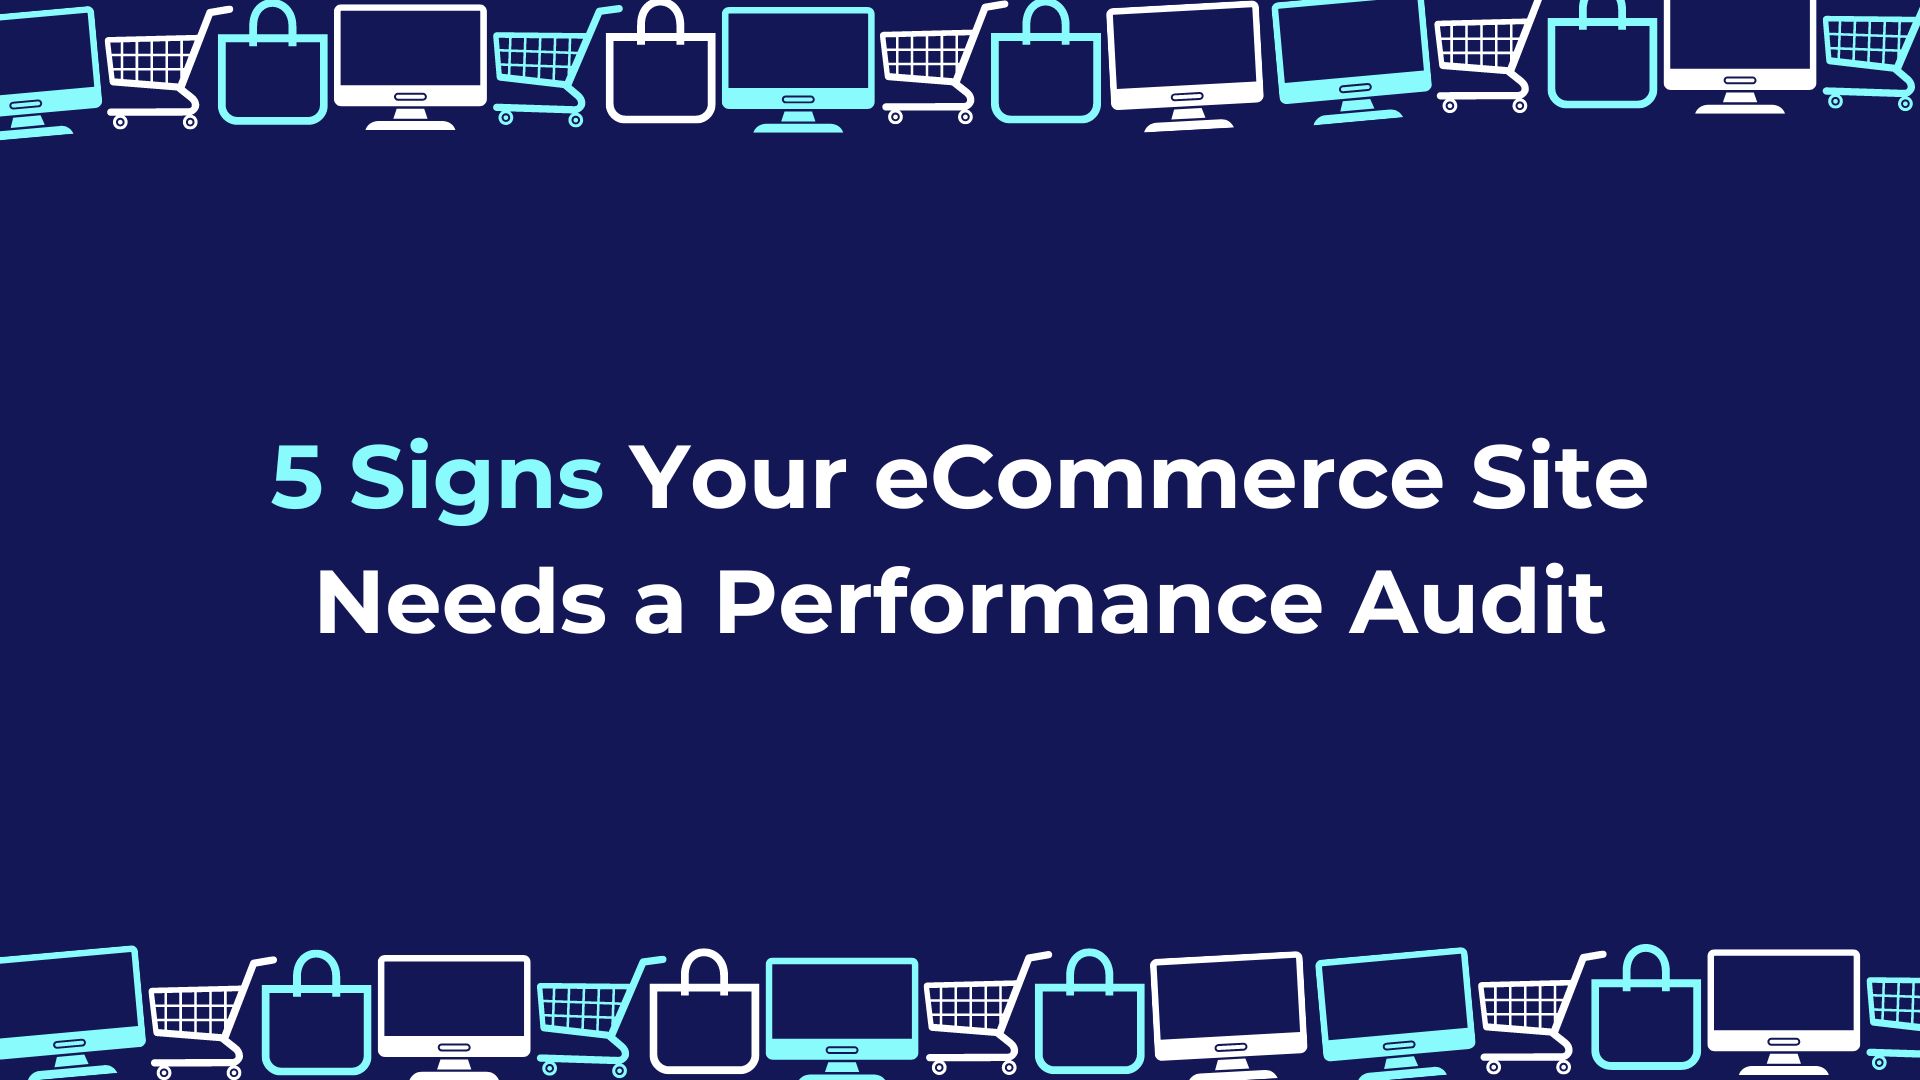 5 Signs Your eCommerce Site Needs a Performance Audit (and How to Fix It)